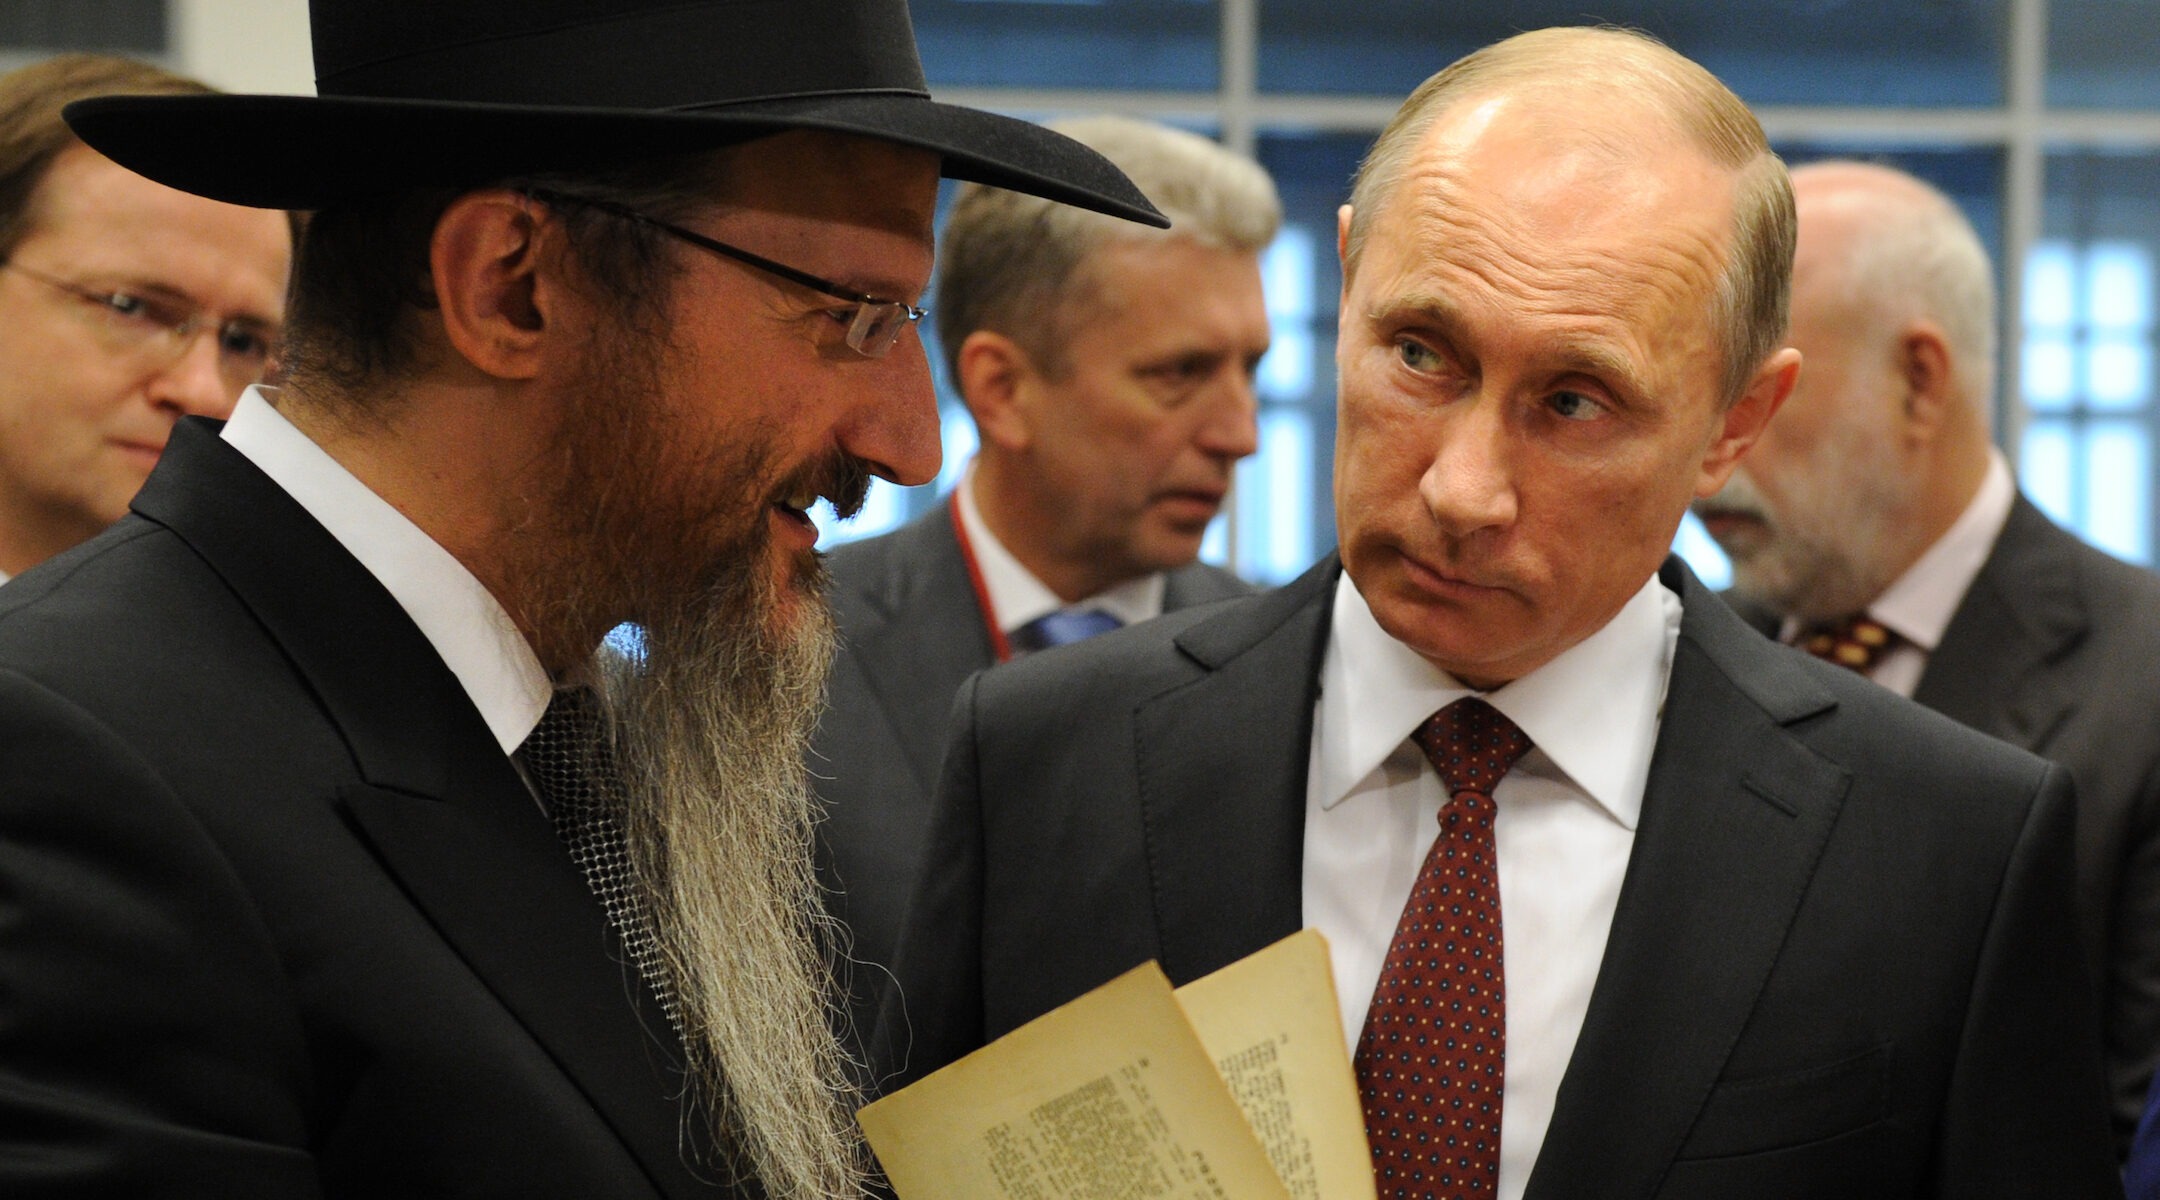 Russia's President Vladimir Putin, right, and Russia's Chief Rabbi Berel Lazar attend a ceremony marking the handover of items in the Schneerson library to a Chabad-run museum in Moscow, June 13, 2013. Putin had hoped the handover would settle a dispute over the collection. (Photo/JTA-Yuri Kadobnov-AFP via Getty Images)